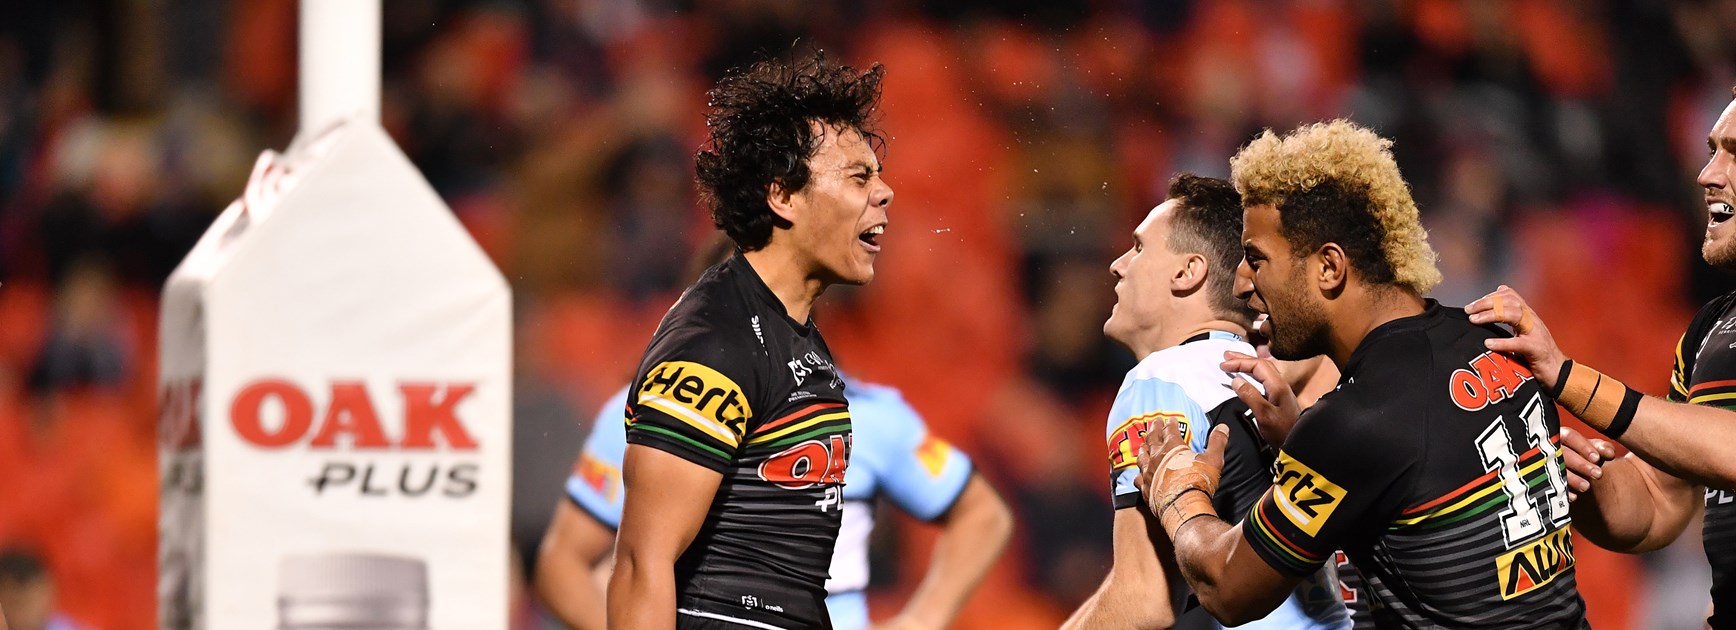 Round 15 snapshot: Perfect 10 puts Panthers three points clear